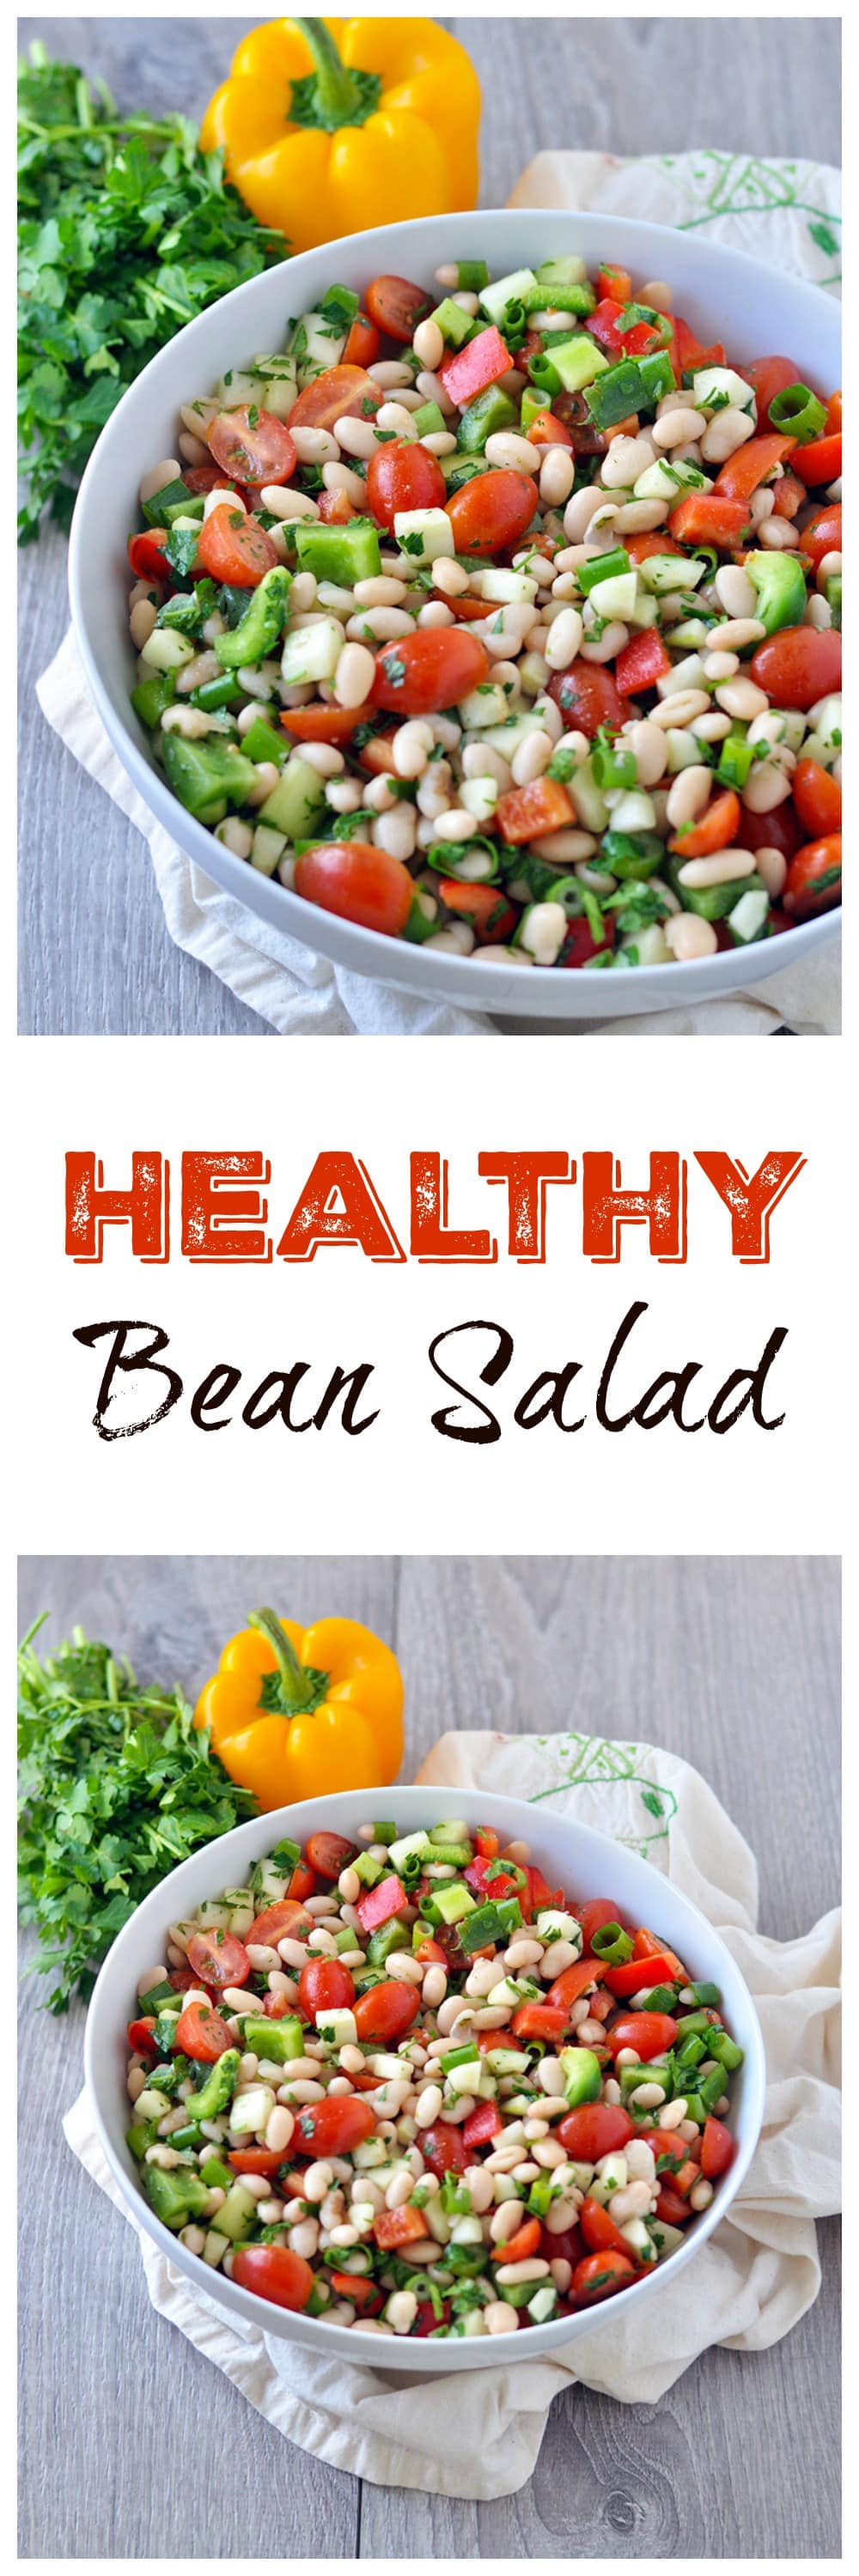 Super Easy Bean Salad with Veggies - My Whole Food Life